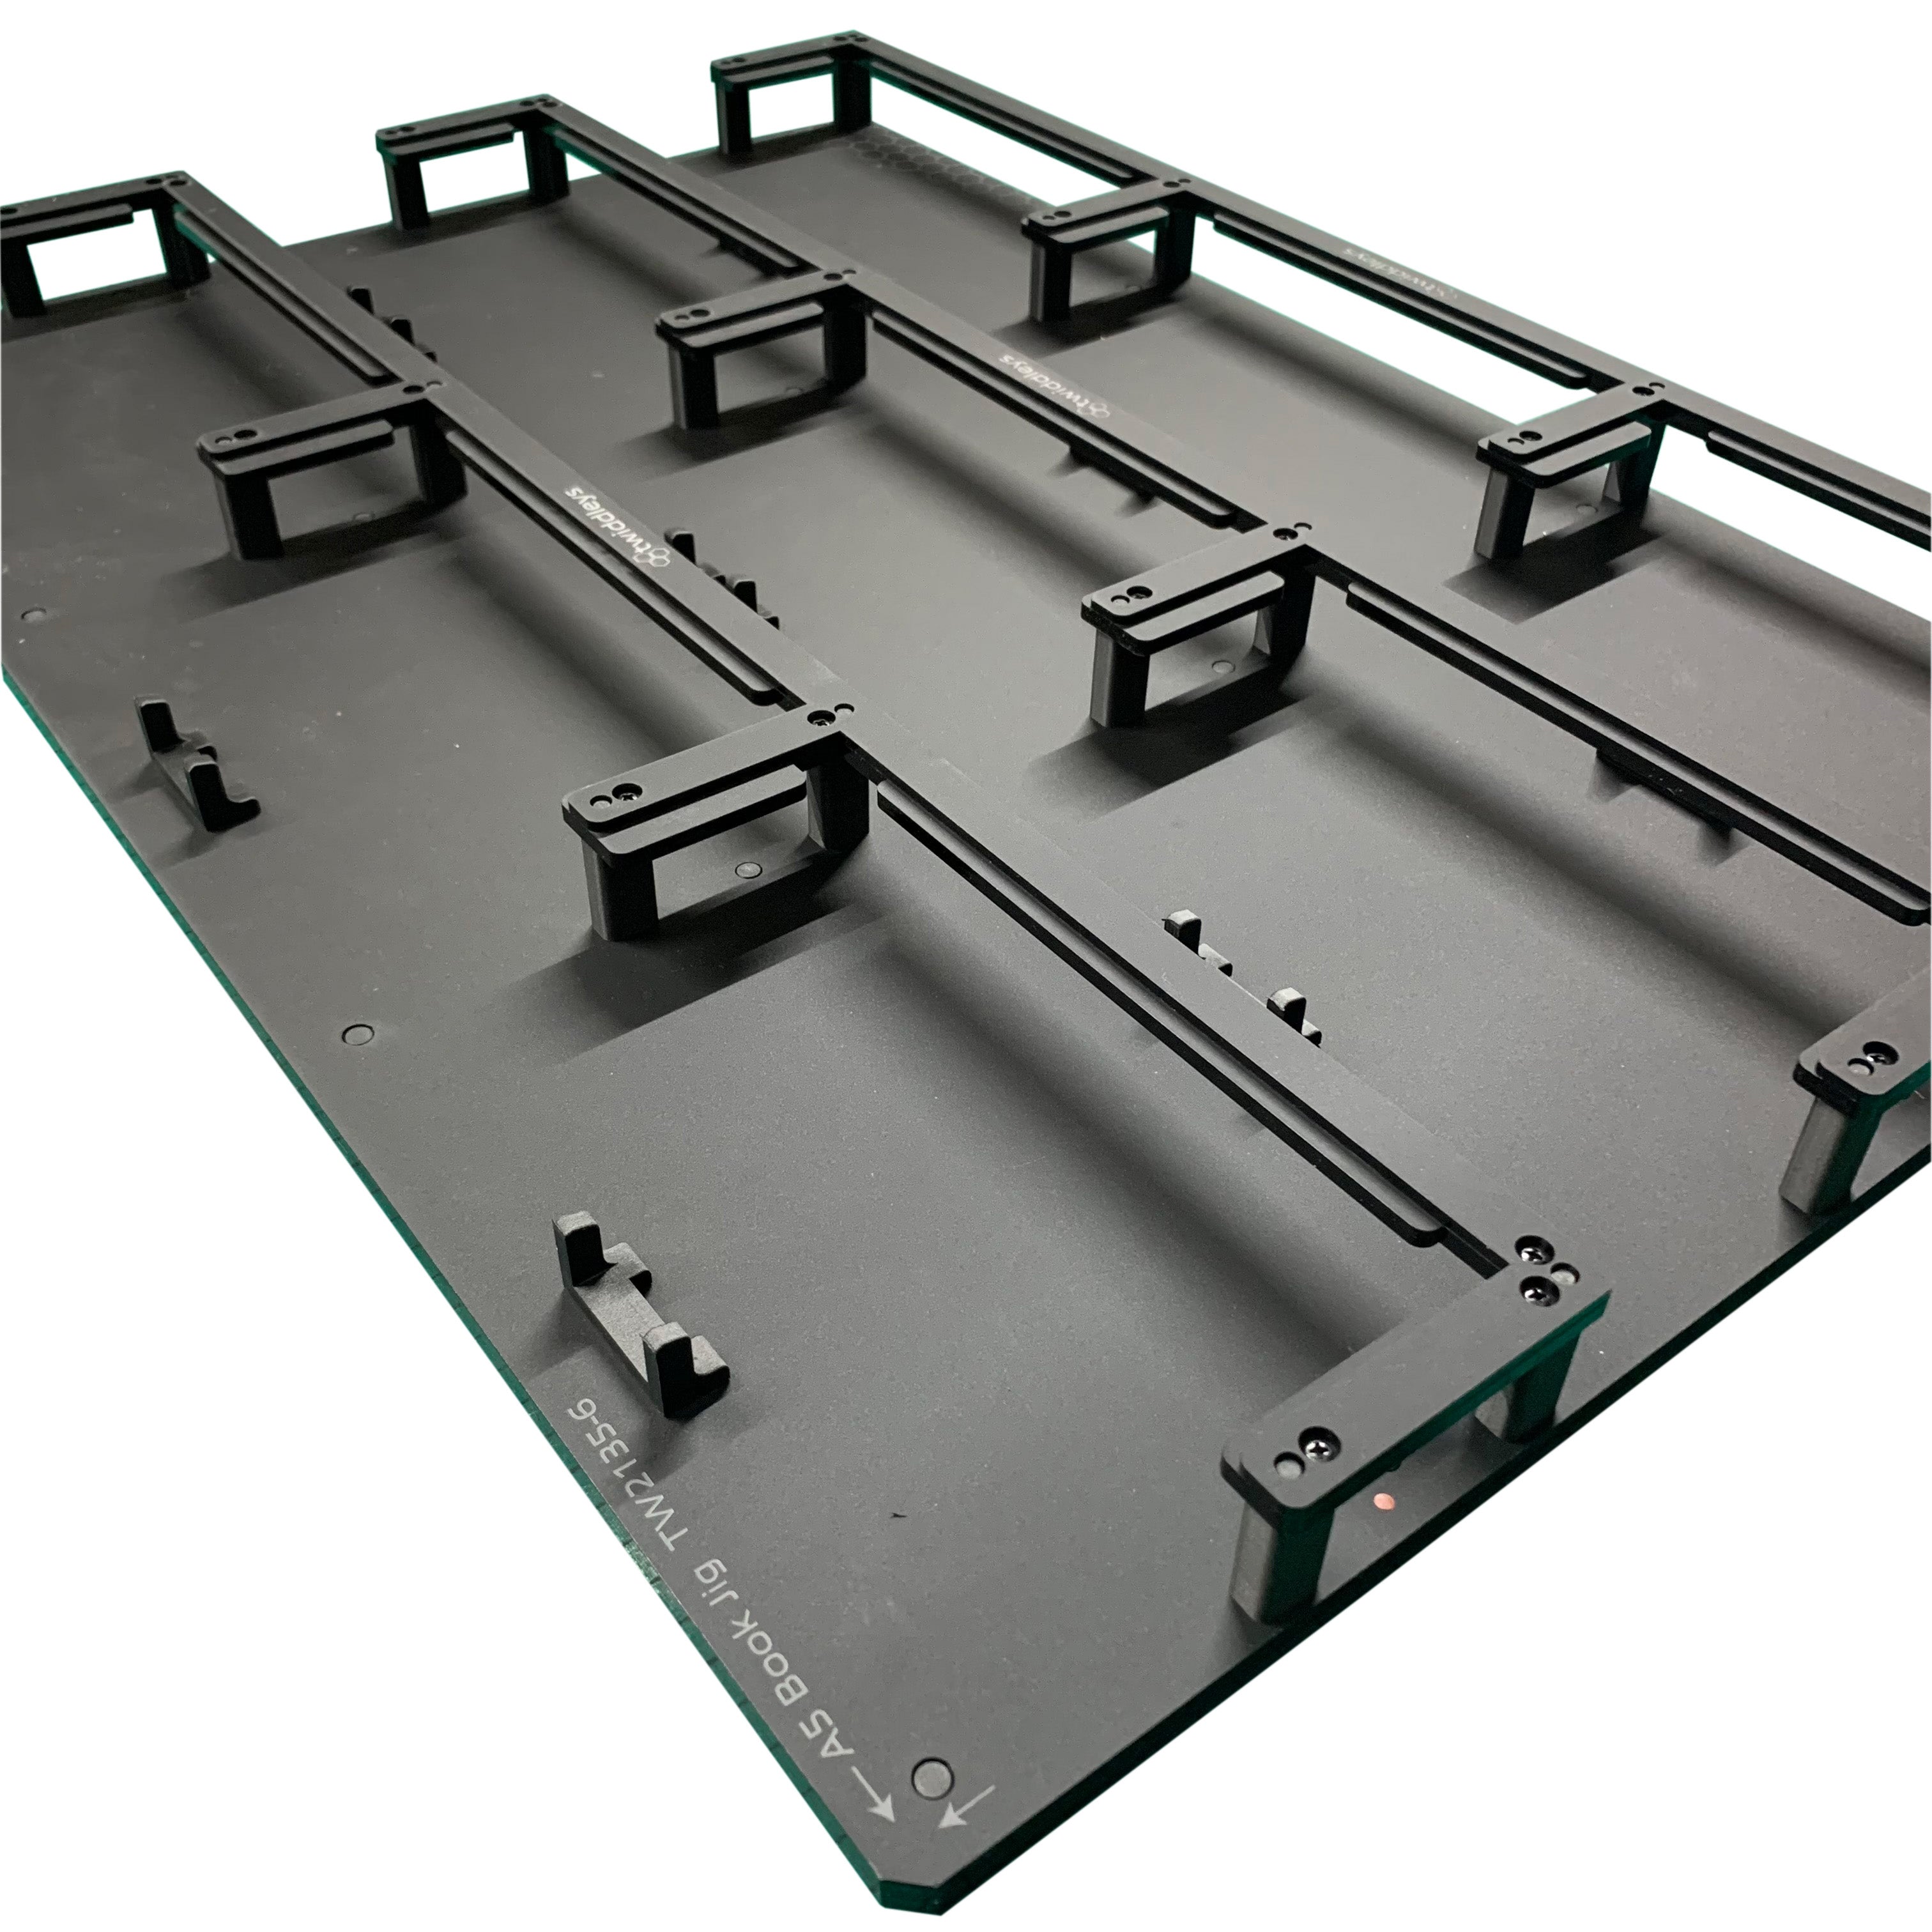 Notebook Printing Jig (145mm x 215mm) for Mimaki UJF-7151 Flatbed Printer (9 Spaces)